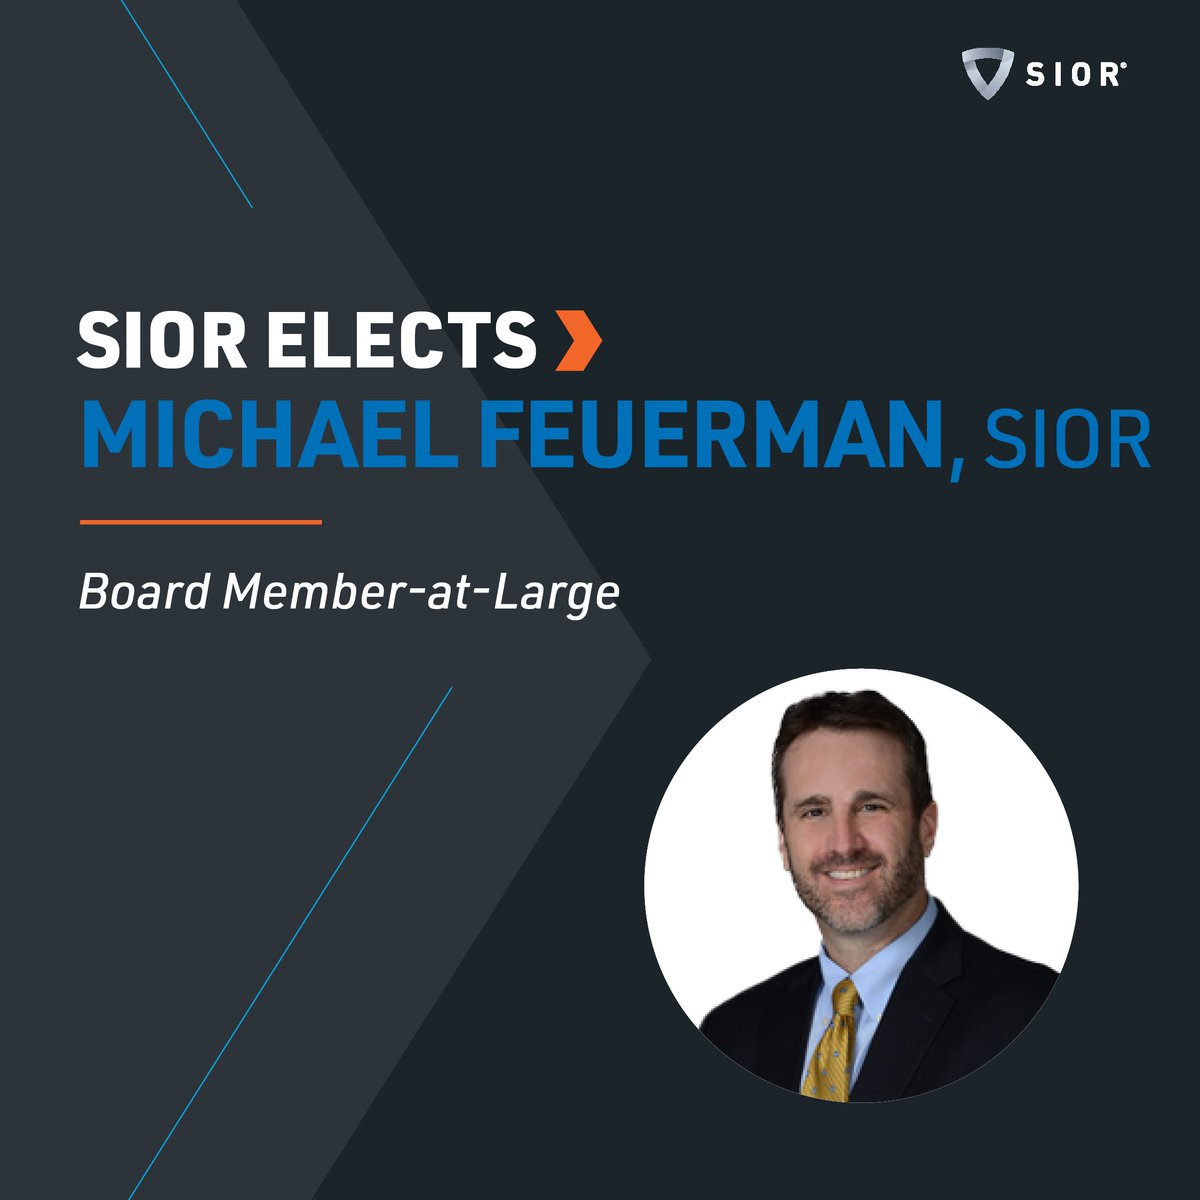 Excited to congratulate Michael Feuerman, SIOR, for his election to serve as a Member-at-Large for the #SIOR Board of Directors. A tenant rep broker since 1999 & a licensed attorney, Michael brings to his role seasoned legal skills and 20+ years of #CRE experience.